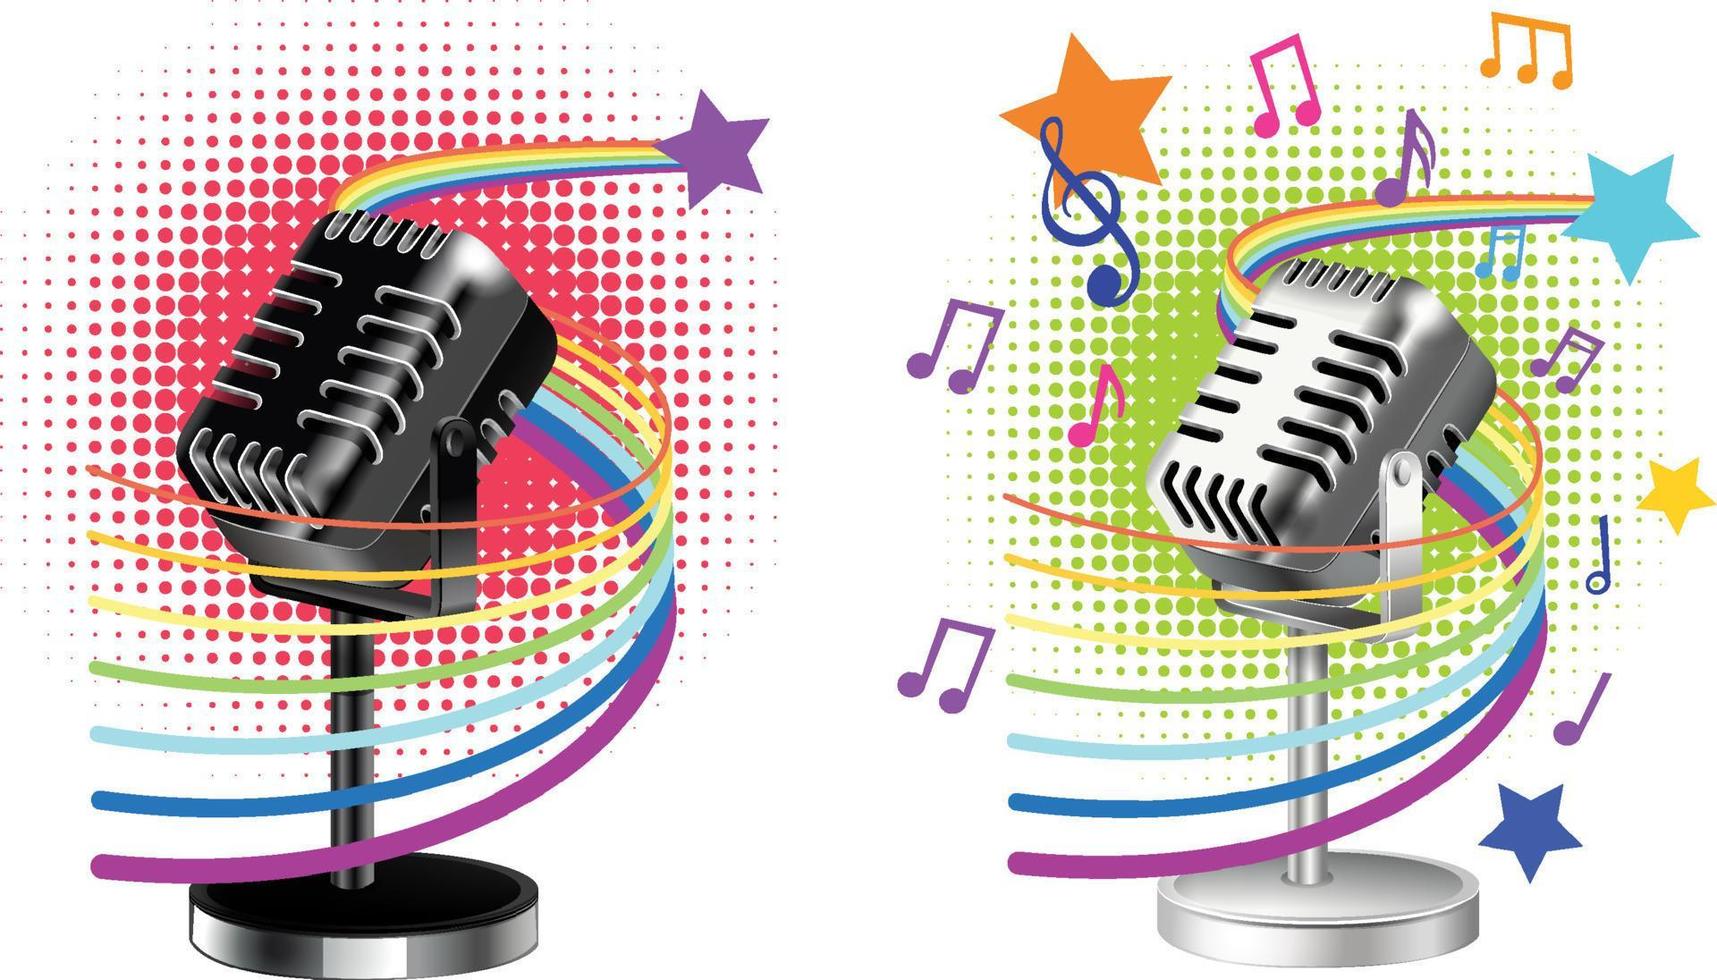 Vintage microphone with music symbols vector